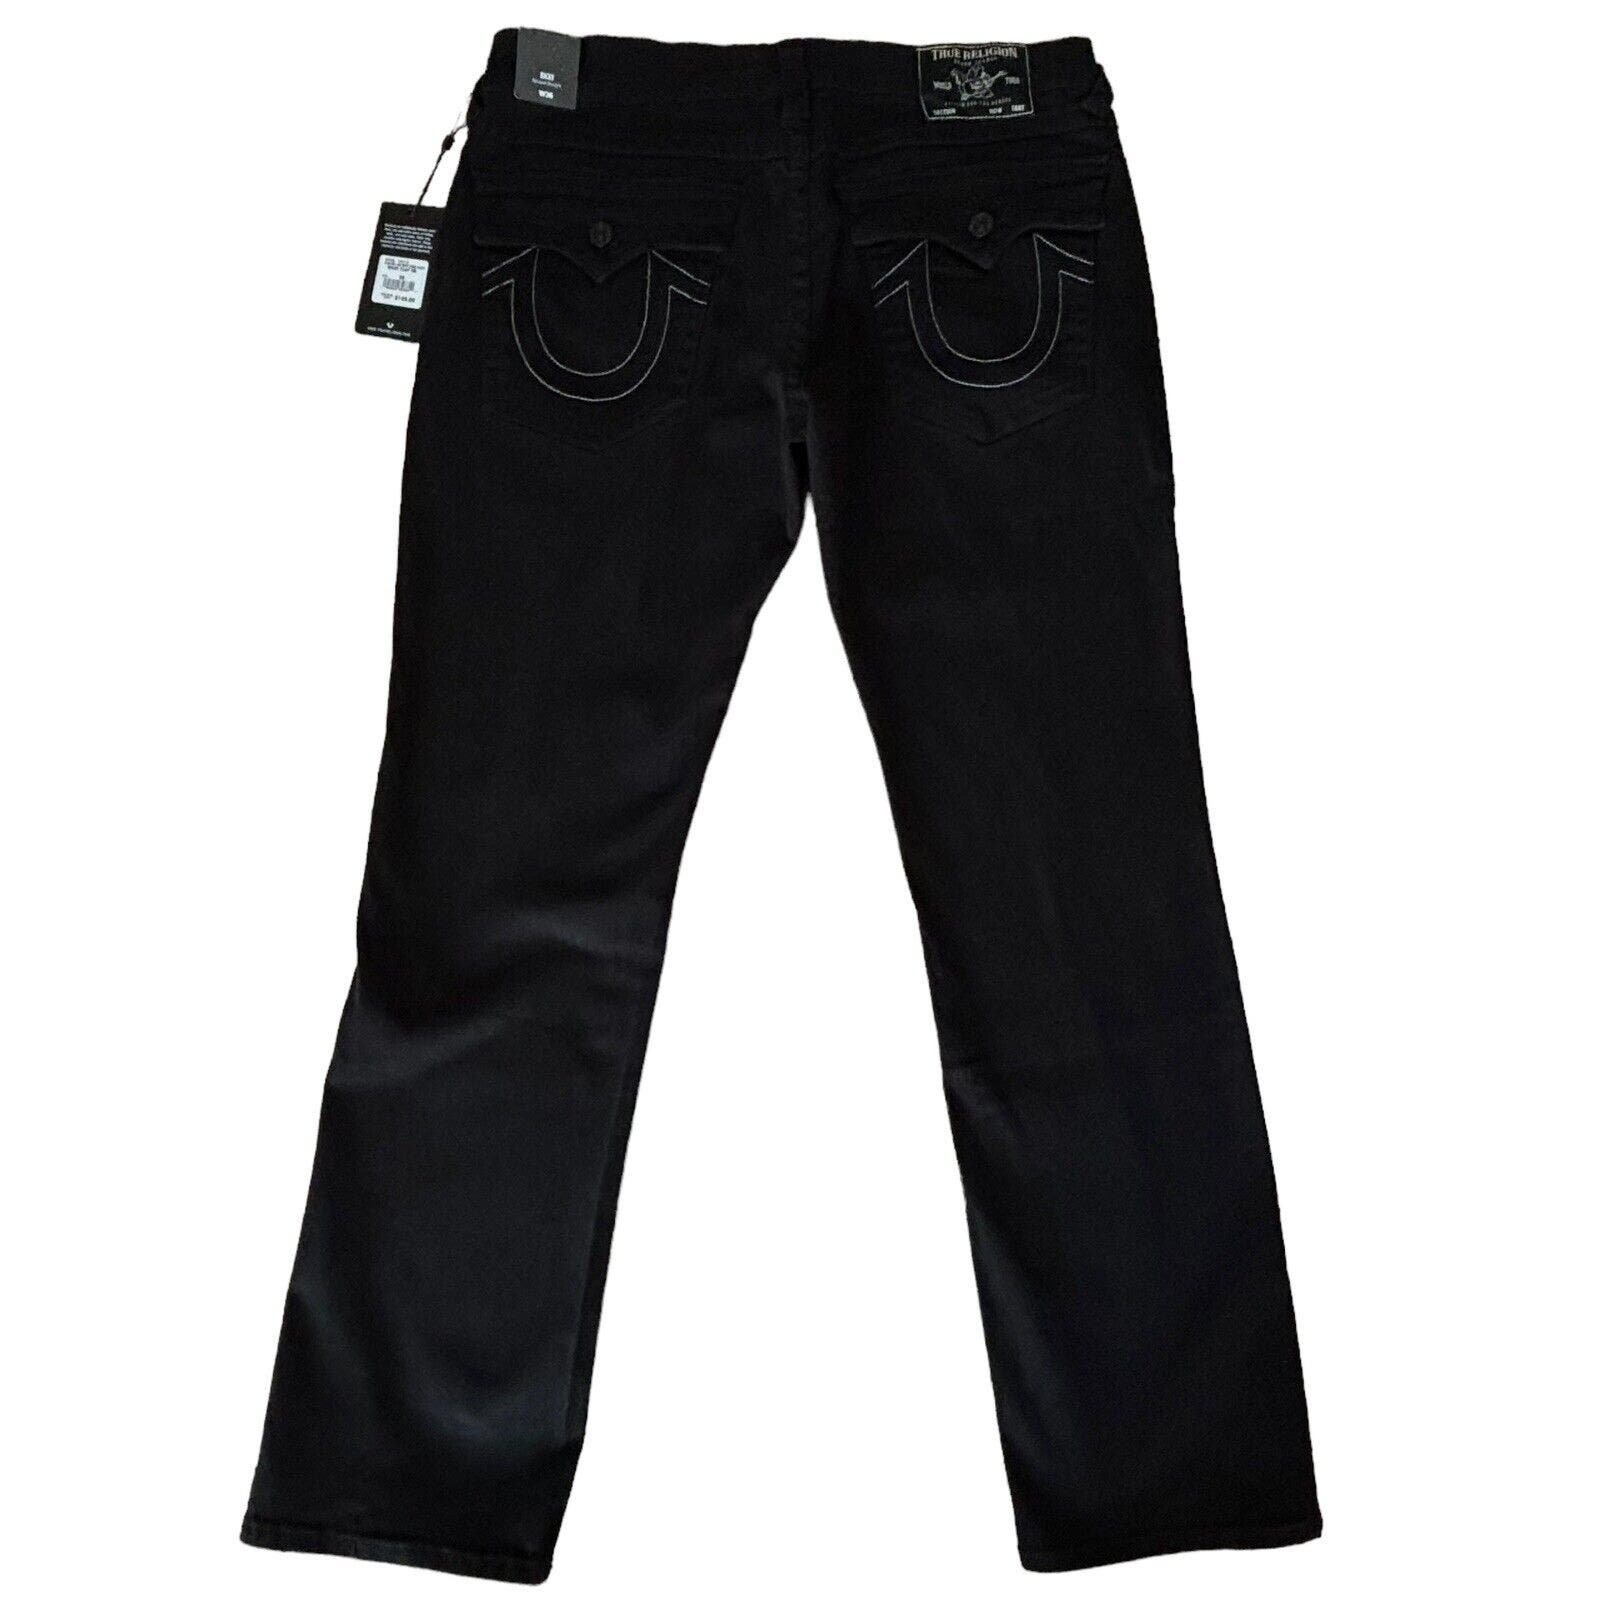 NEW True Religion Men´s Black Rinse Ricky Relaxed Straight Jeans Size 36x32 2gcUCK970